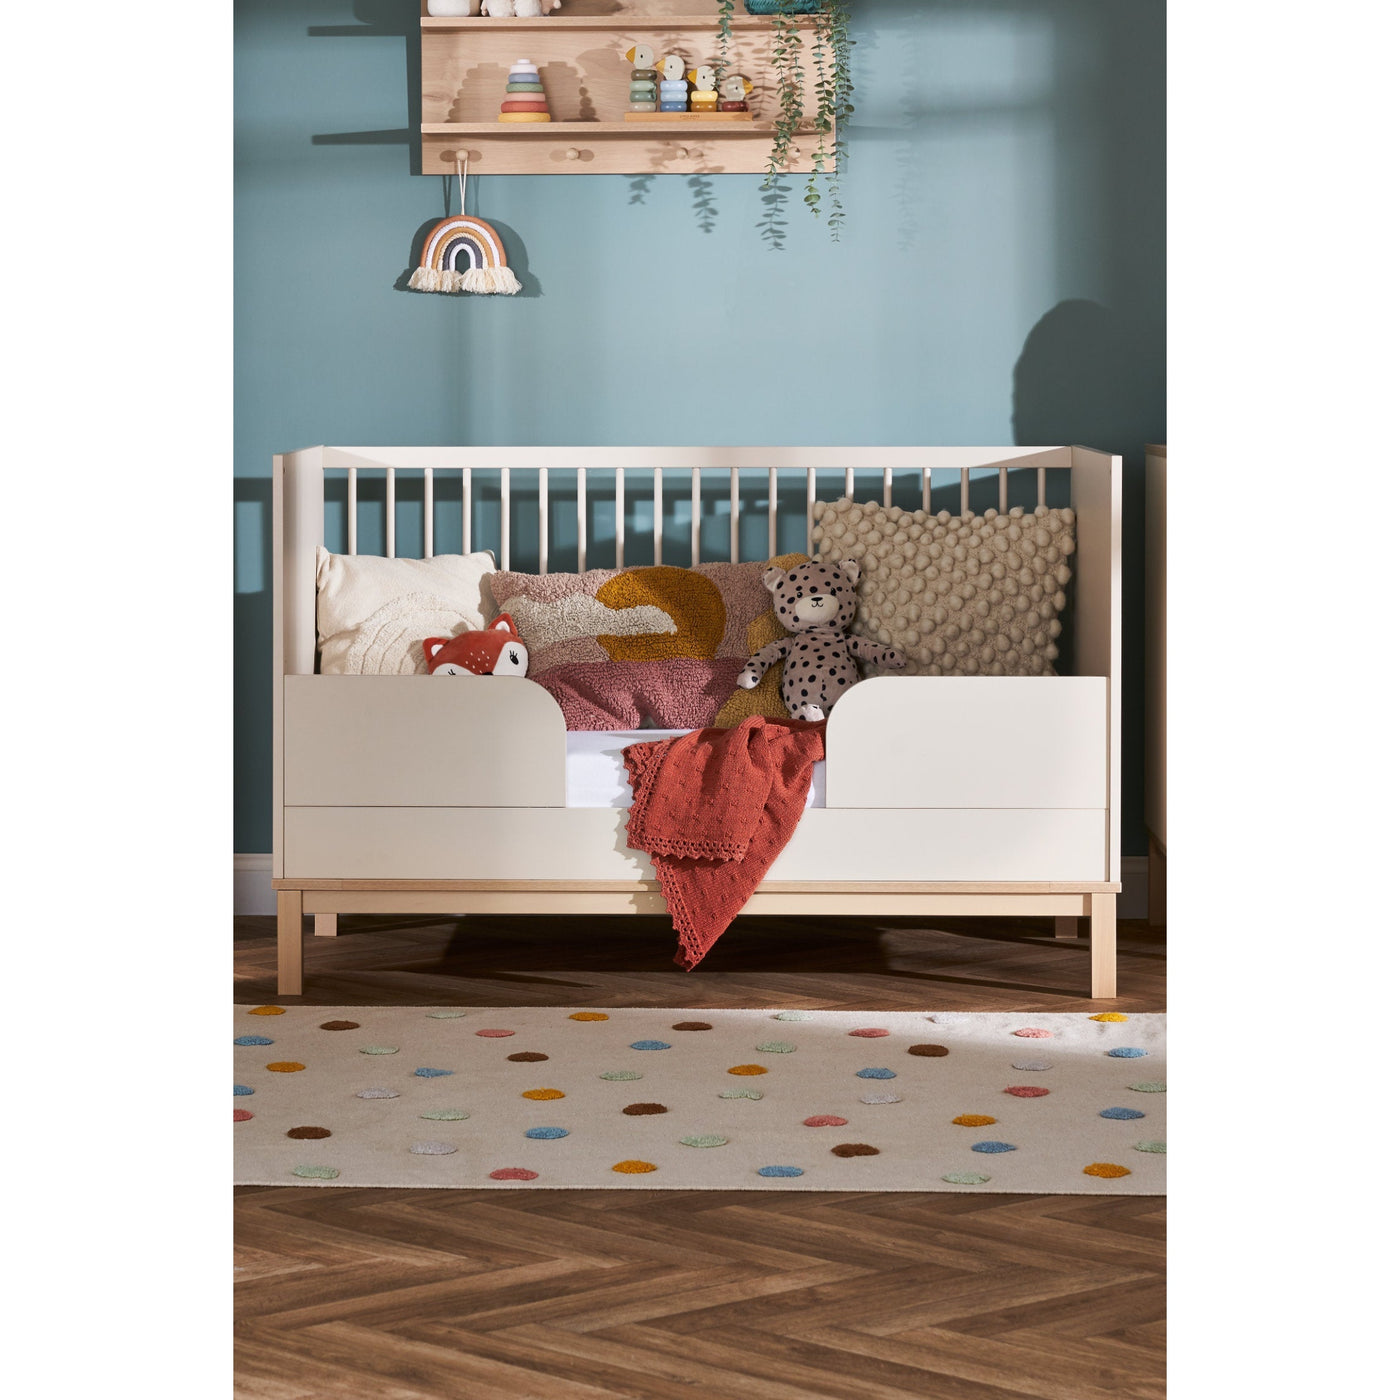 Astrid Cot Bed - Satin-Cots & Cot Beds-OBABY-Yes Bebe